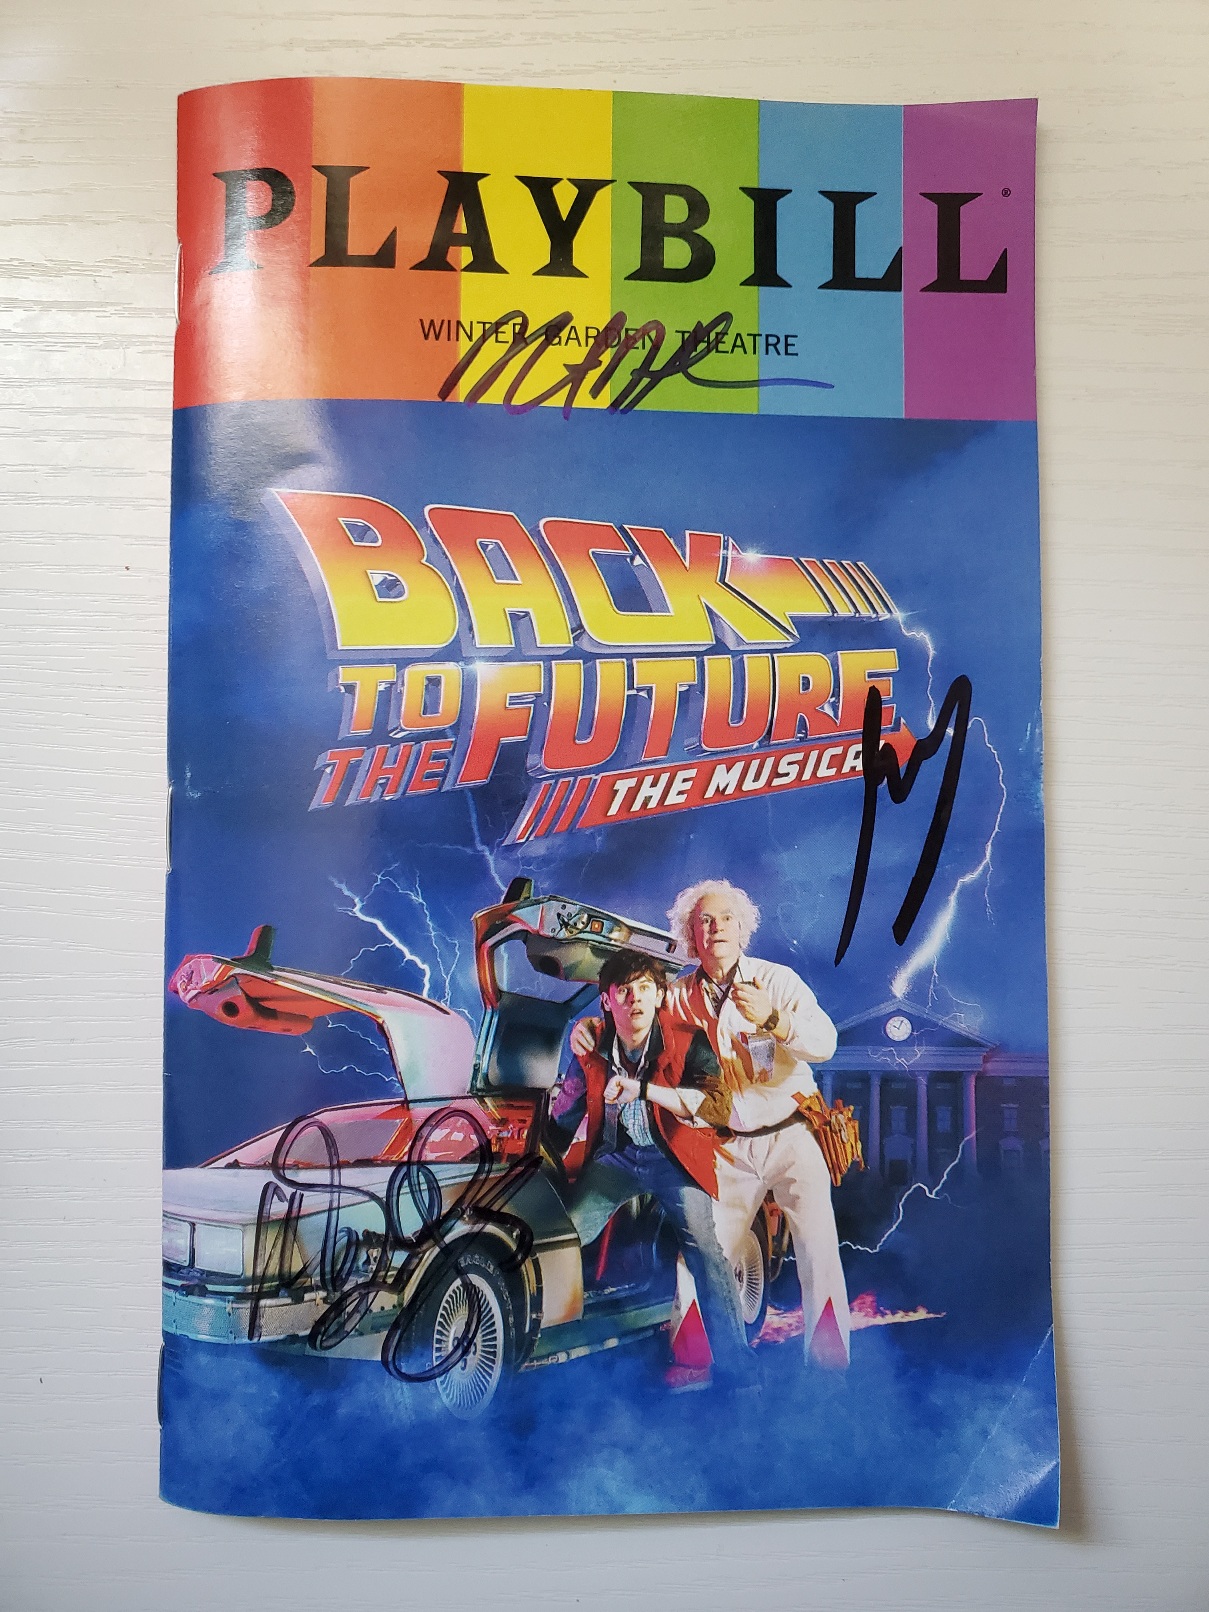 pride playbill for back to the future the musical on broadway